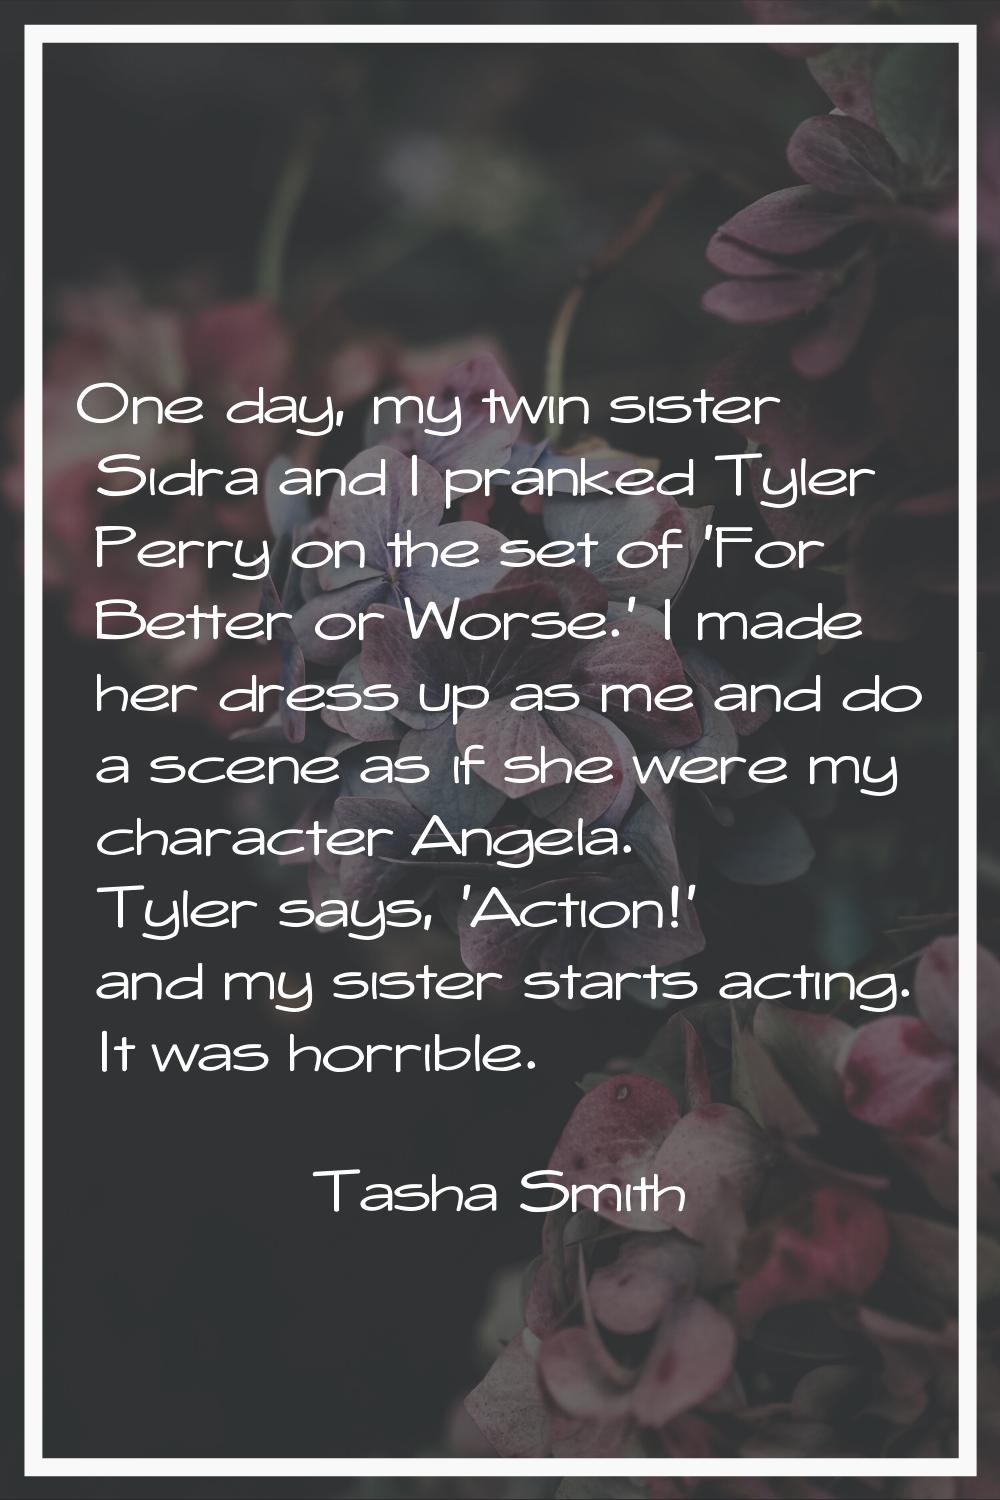 One day, my twin sister Sidra and I pranked Tyler Perry on the set of 'For Better or Worse.' I made